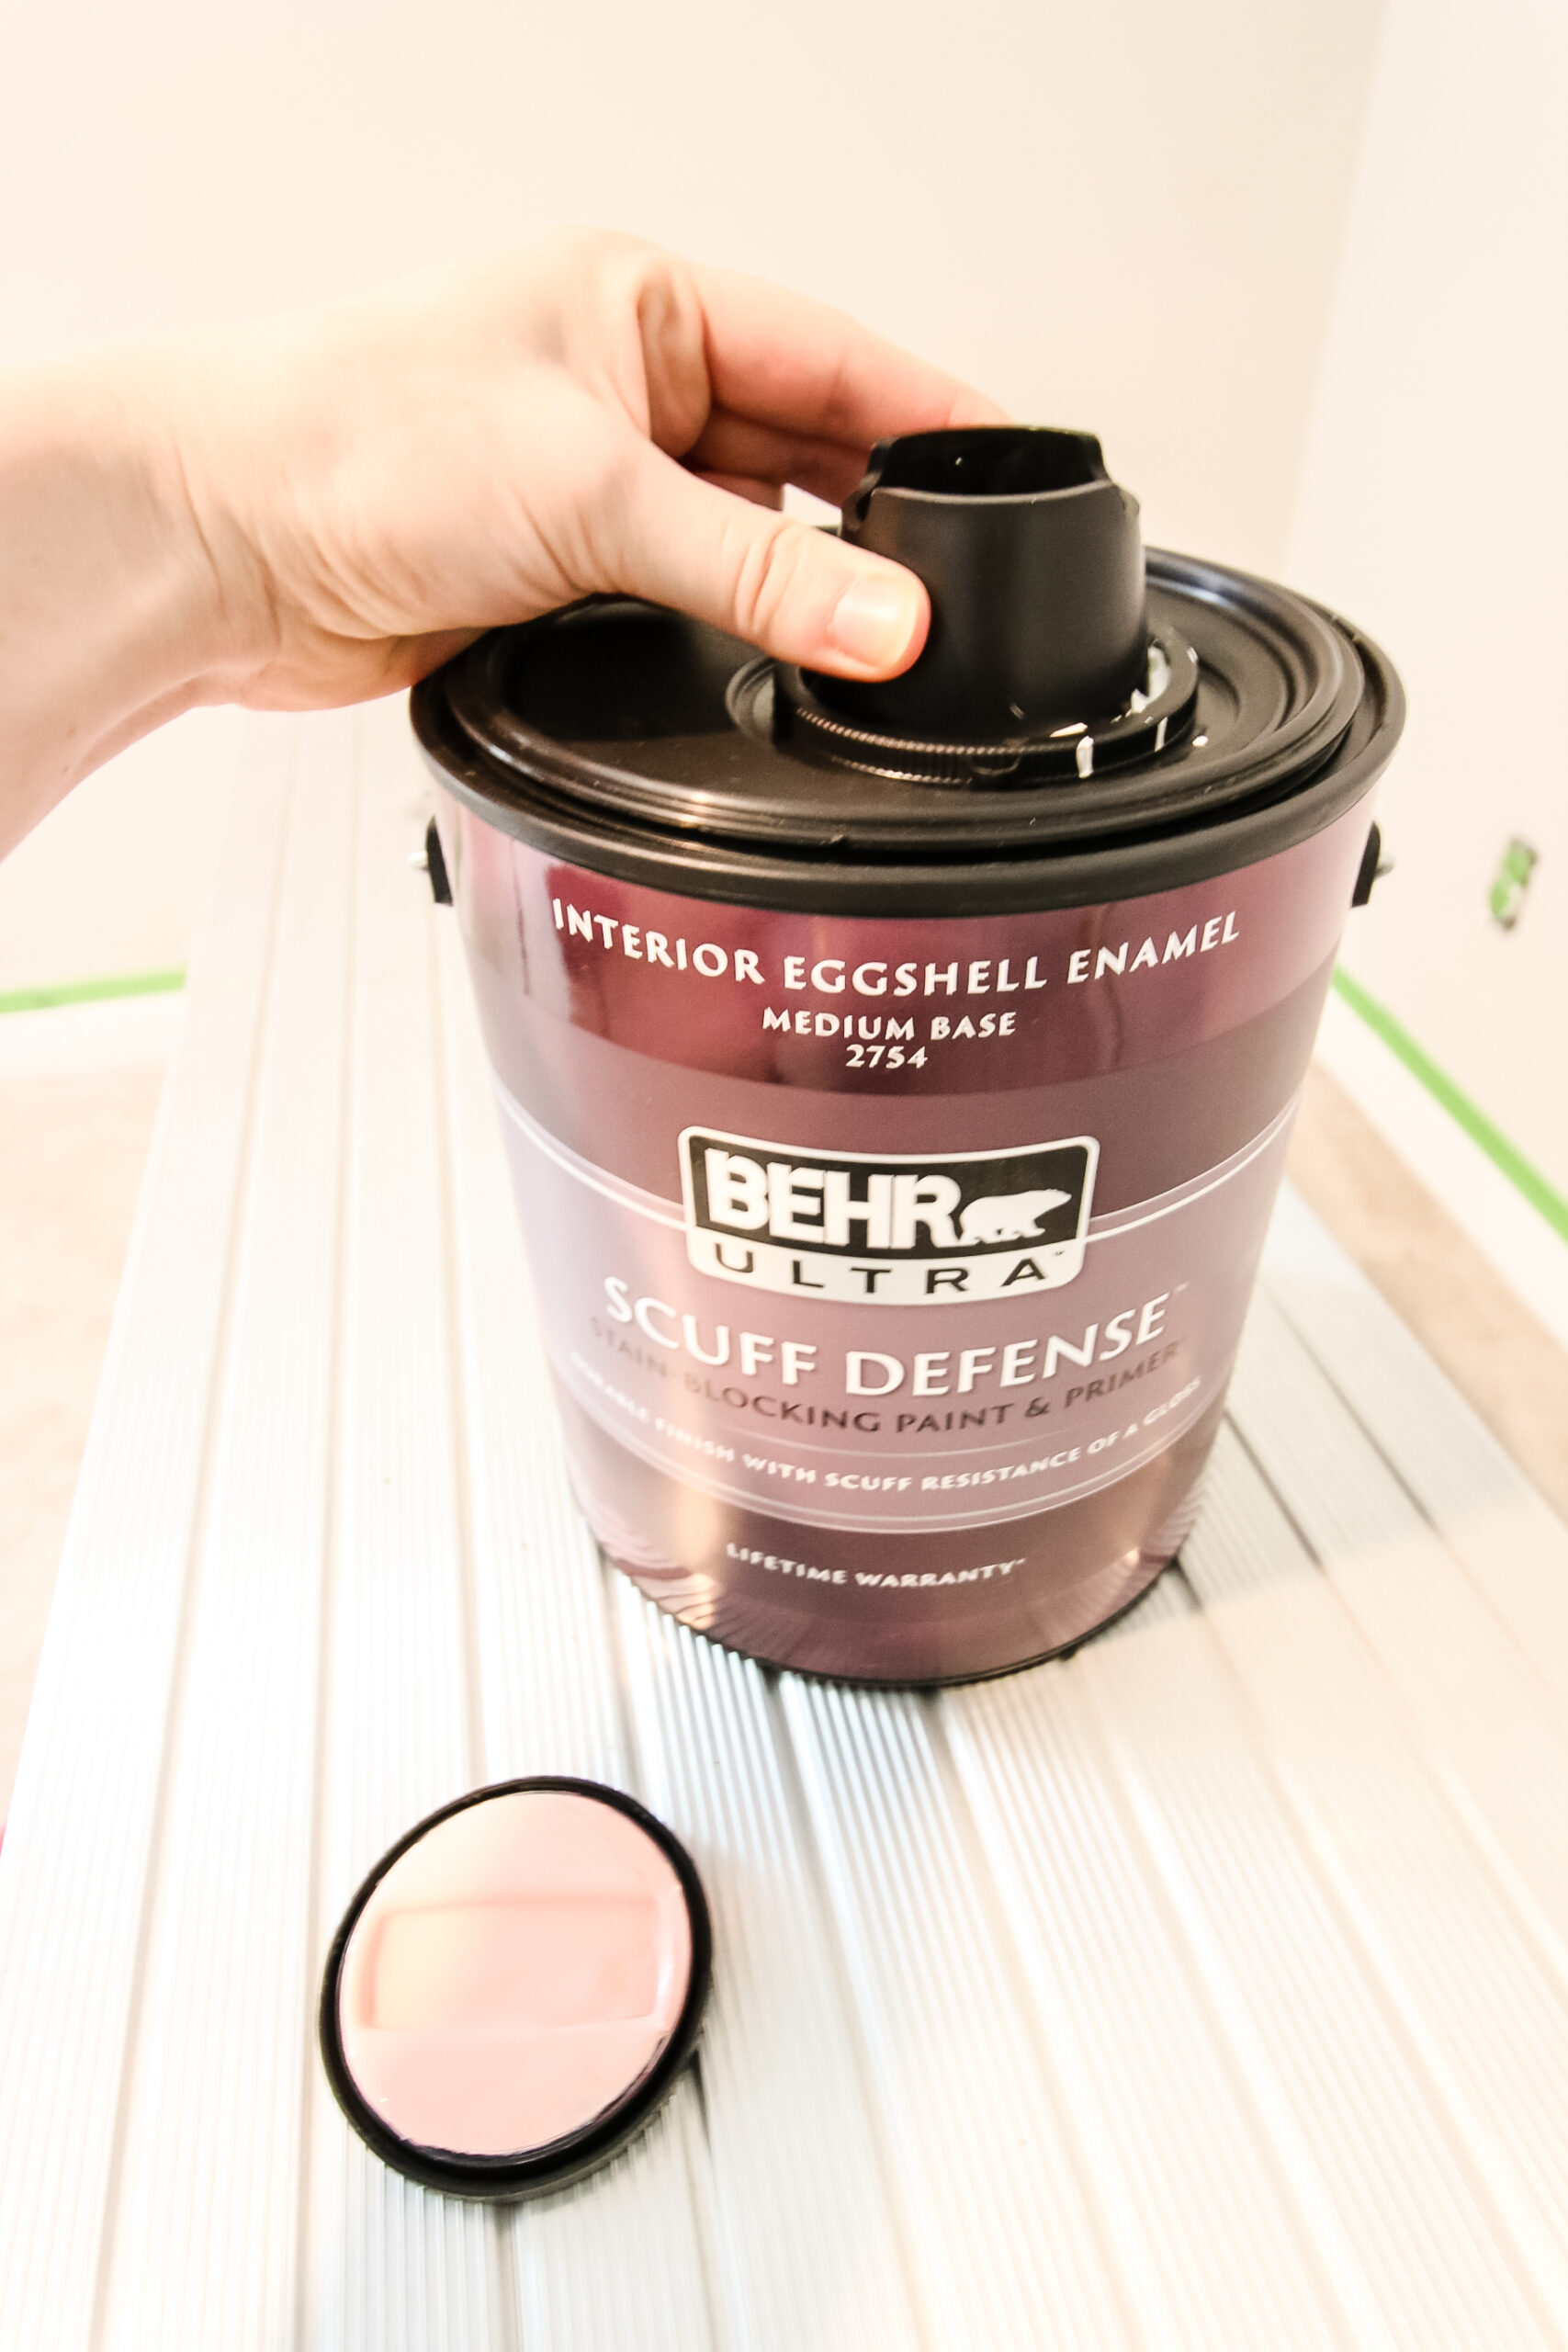 How To Open Behr Paint Can Without Spout